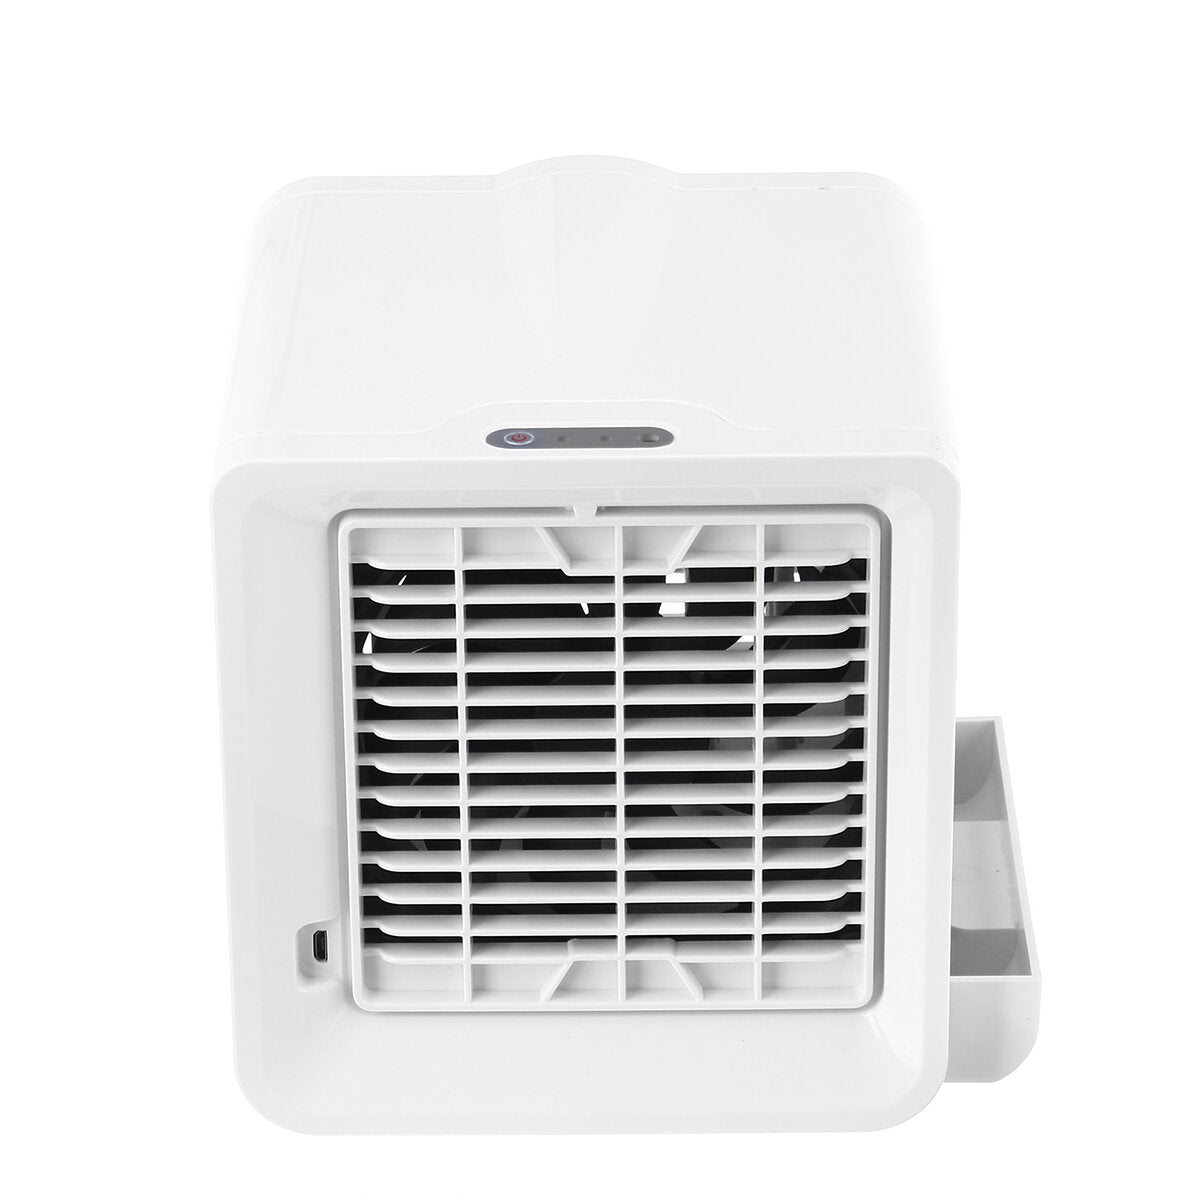 3 Gears Mini Air Conditioner Cooler Portable Cooling Fan Humidifier For Home